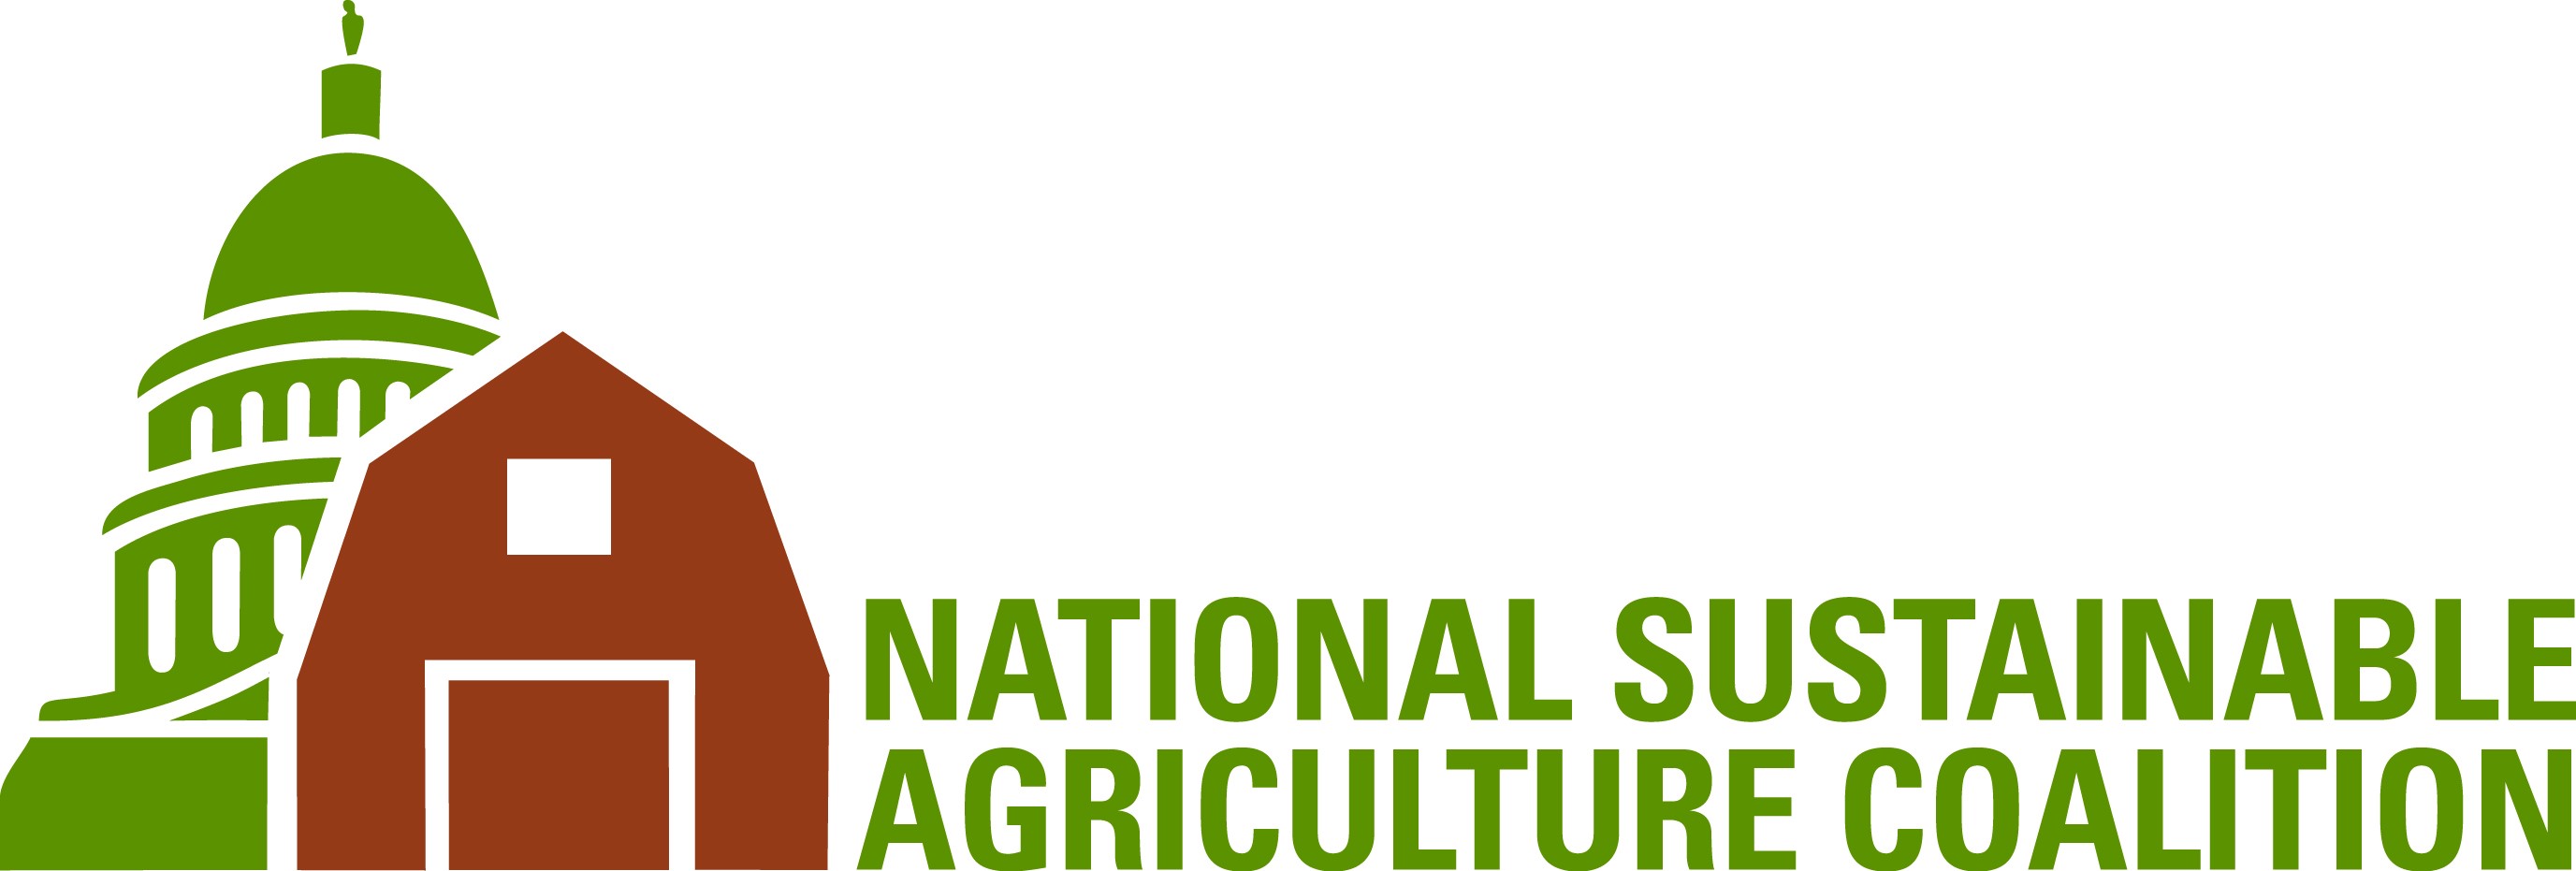 NSAC Says Renewed Focus on Climate Change Presents Opportunities for Sustainable Agriculture